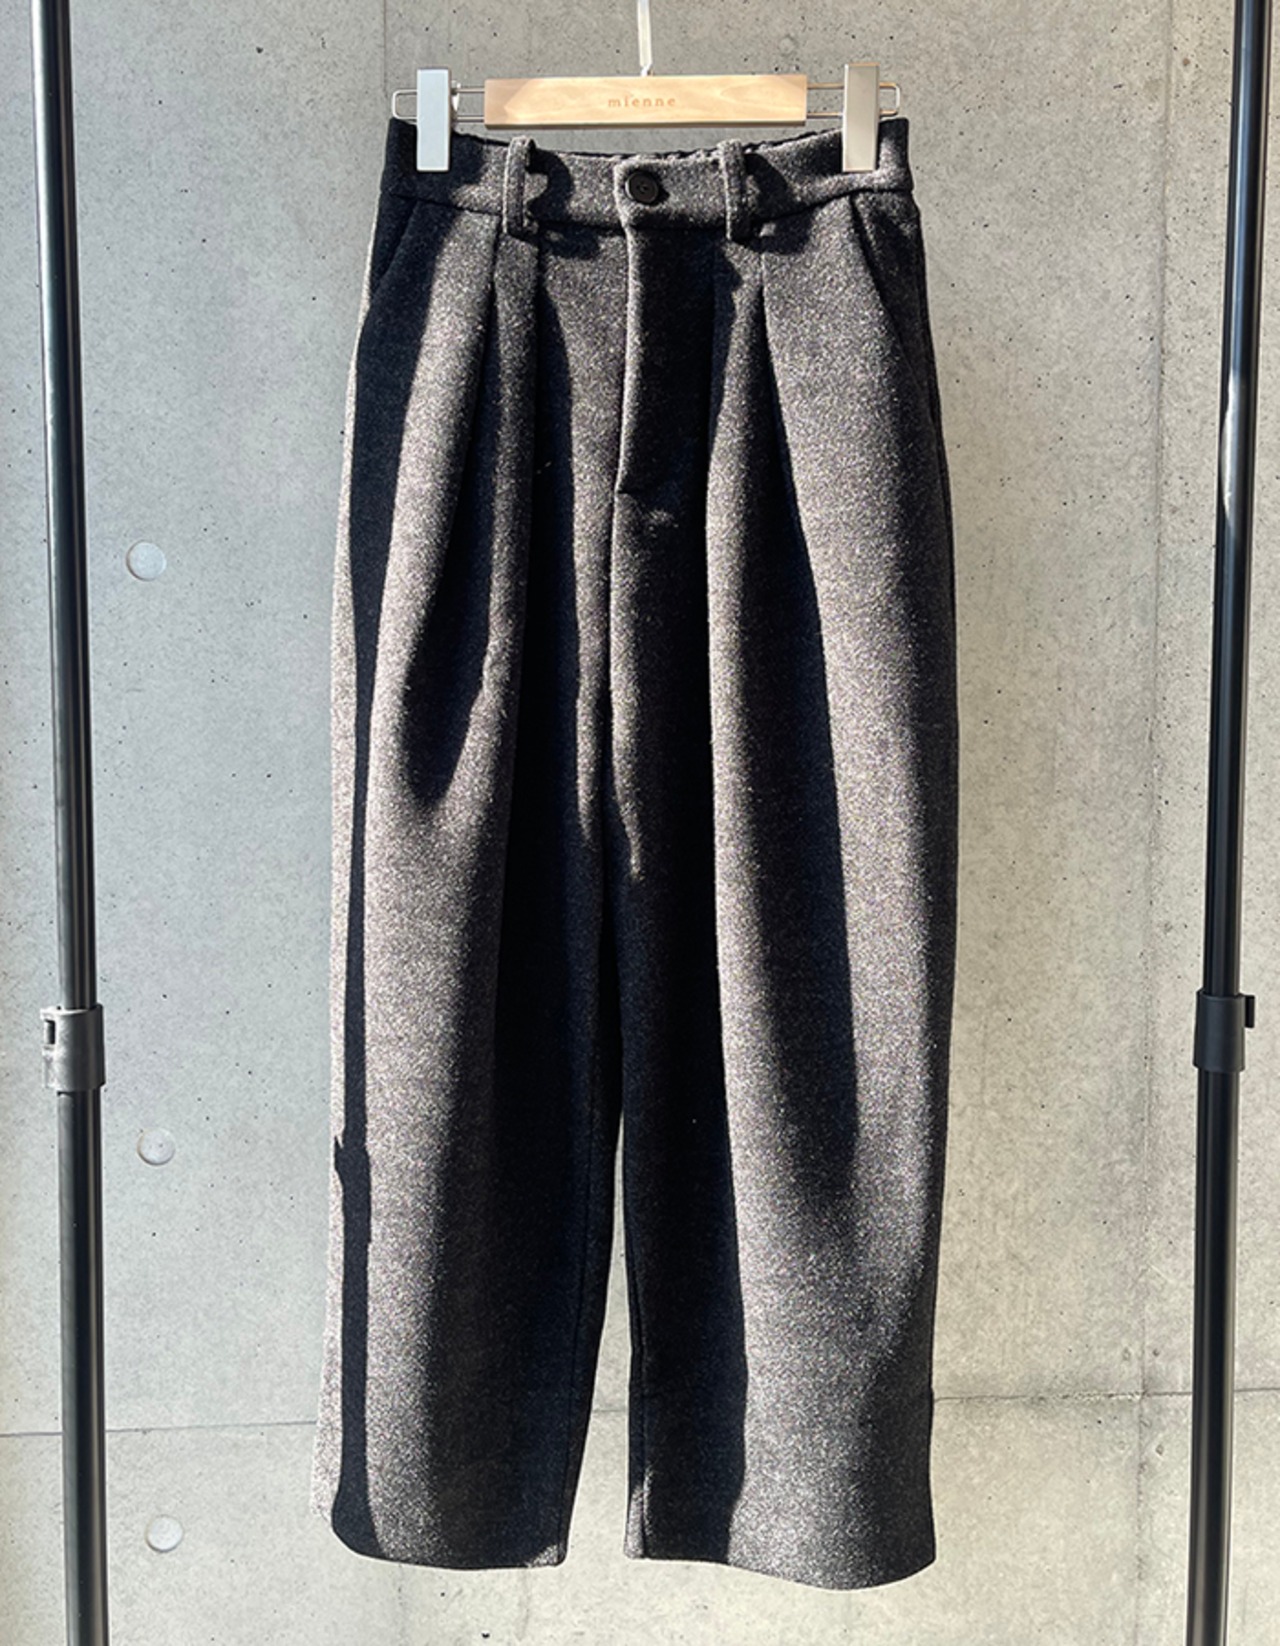 【SALE】Pin-tuck Roll-up Baggy pants_DarkGray